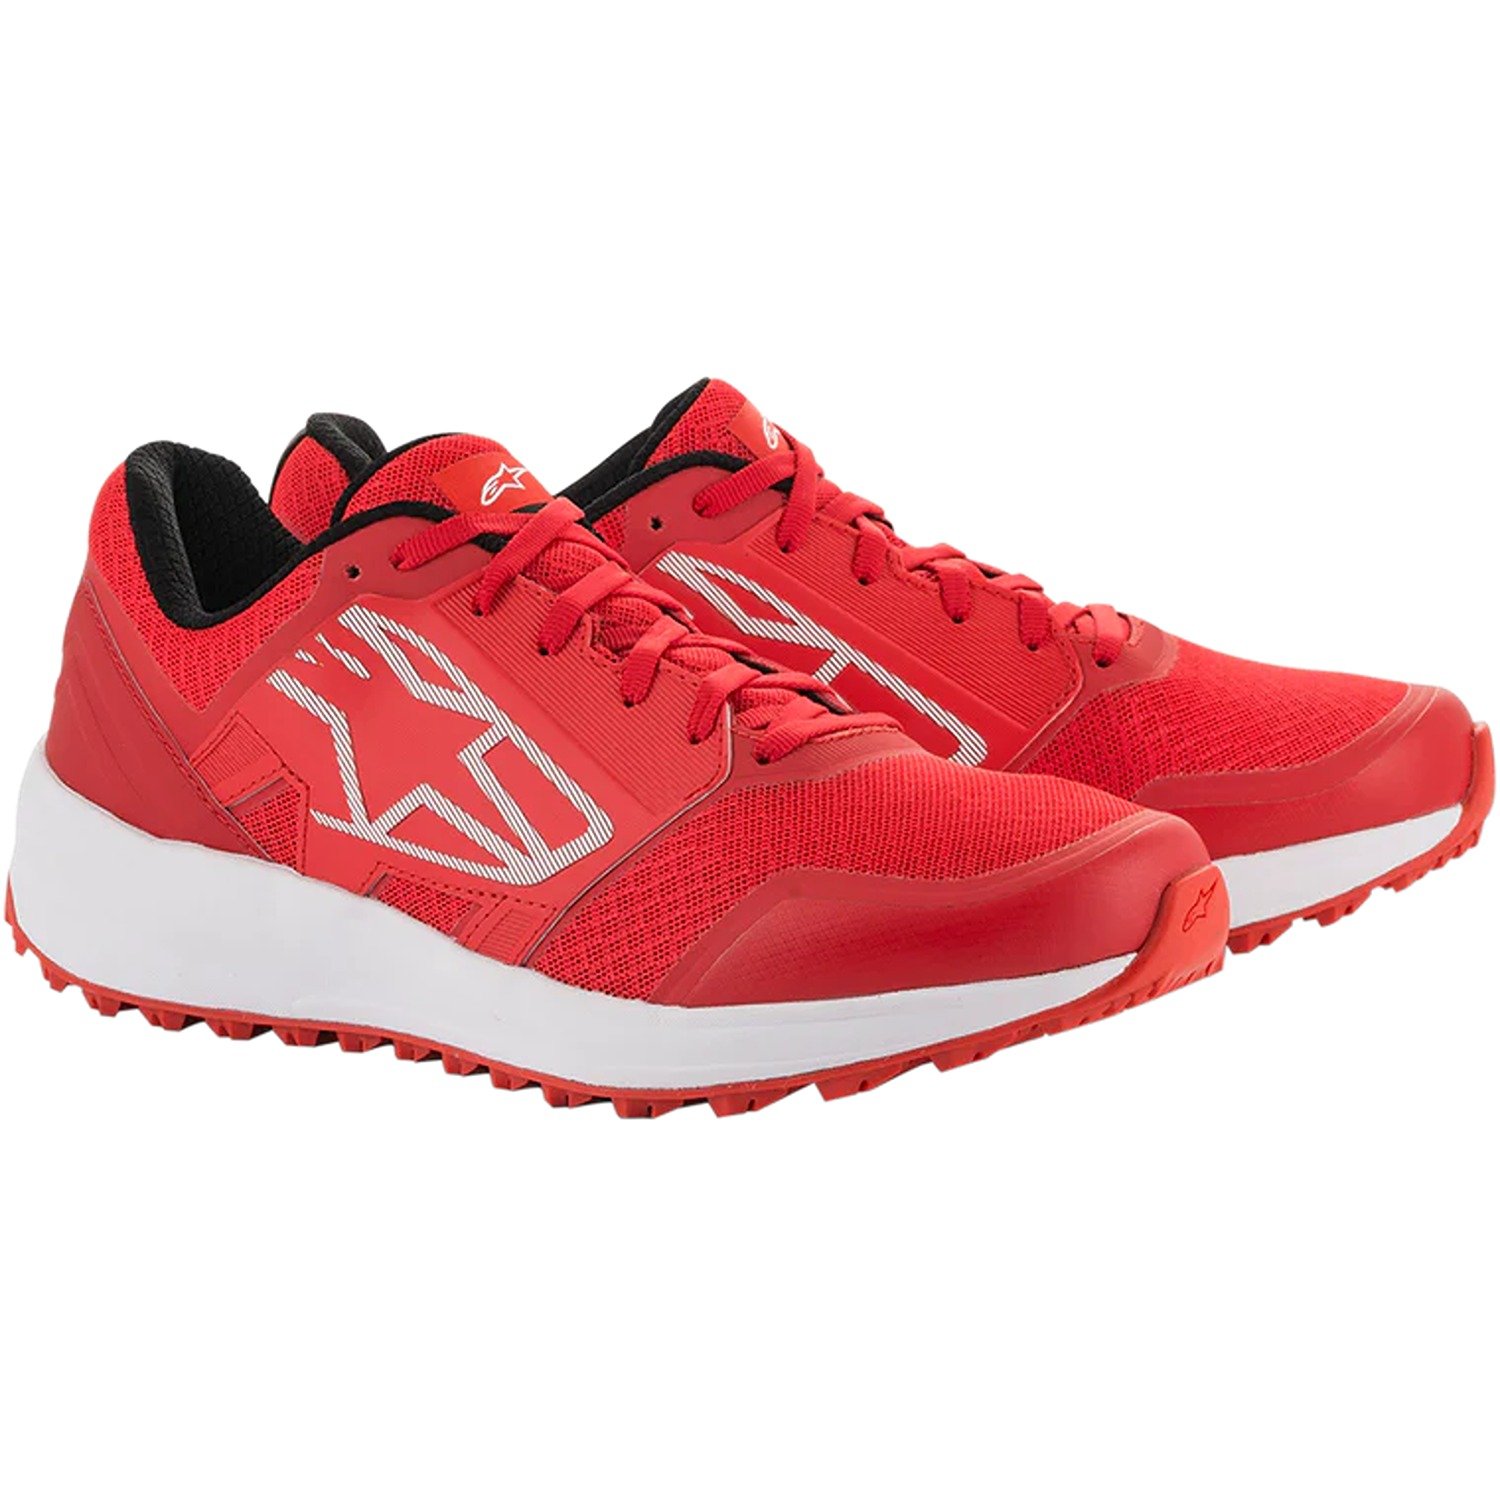 Image of EU Alpinestars Meta Trail Shoes Red White Taille US 5